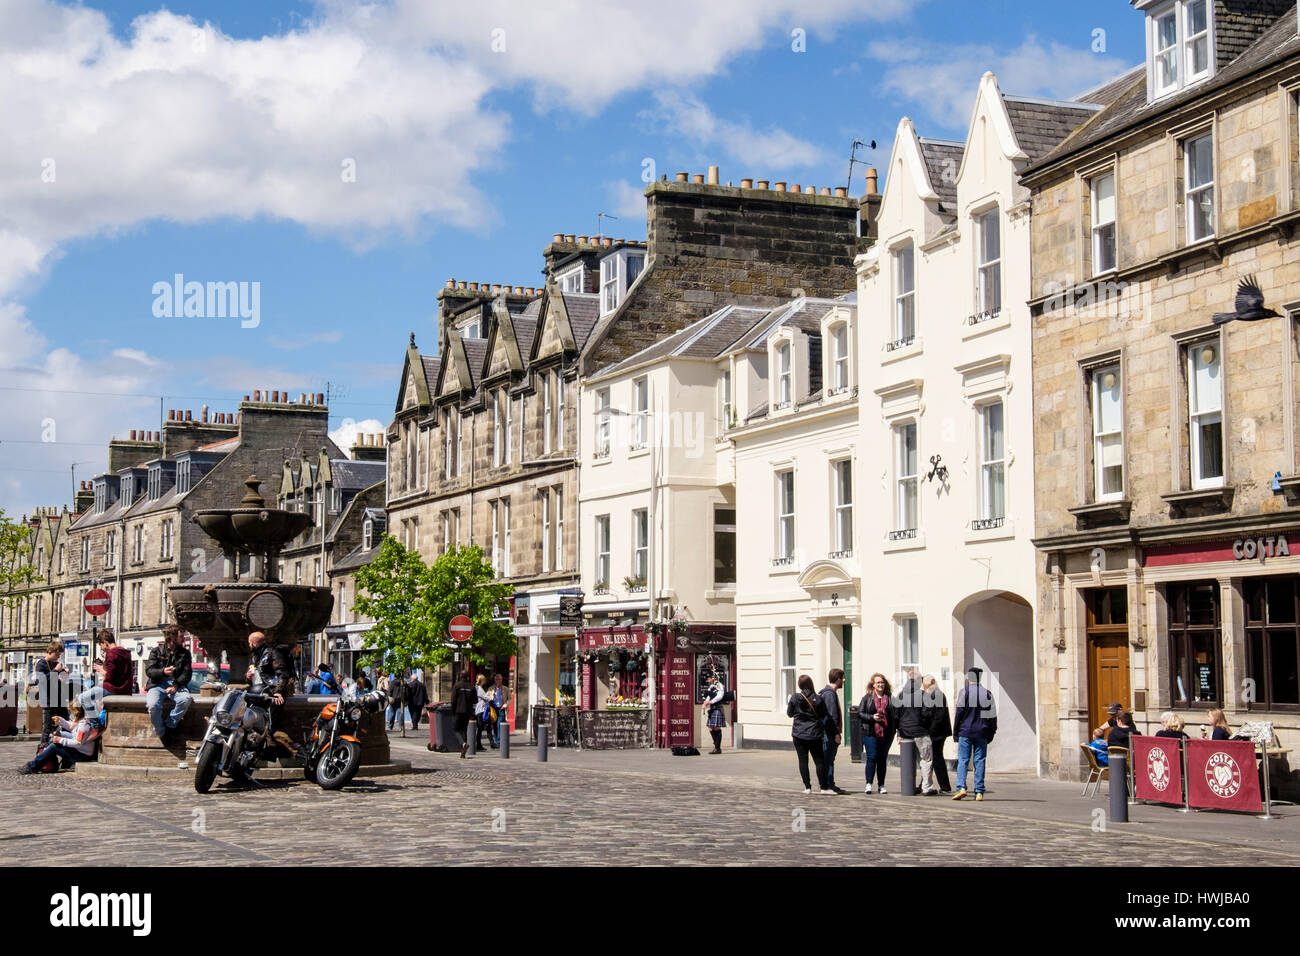 Street scene by small shops in town centre in summer. Market Street, Royal Burgh St Andrews, Fife, Scotland, UK, Britain Stock Photo